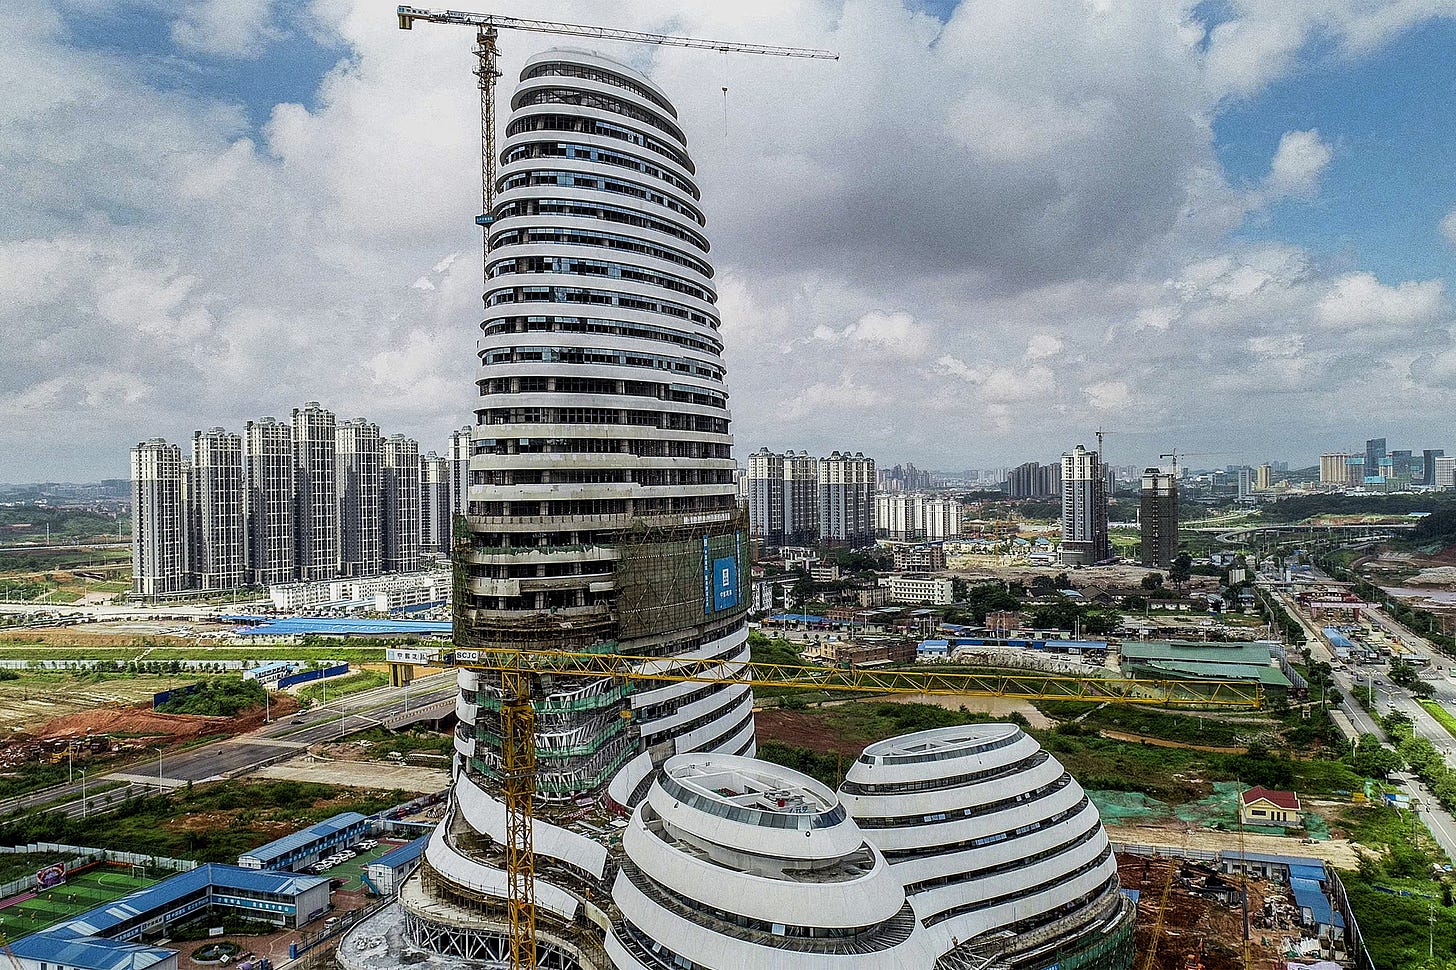 This building in China looks like a massive penis